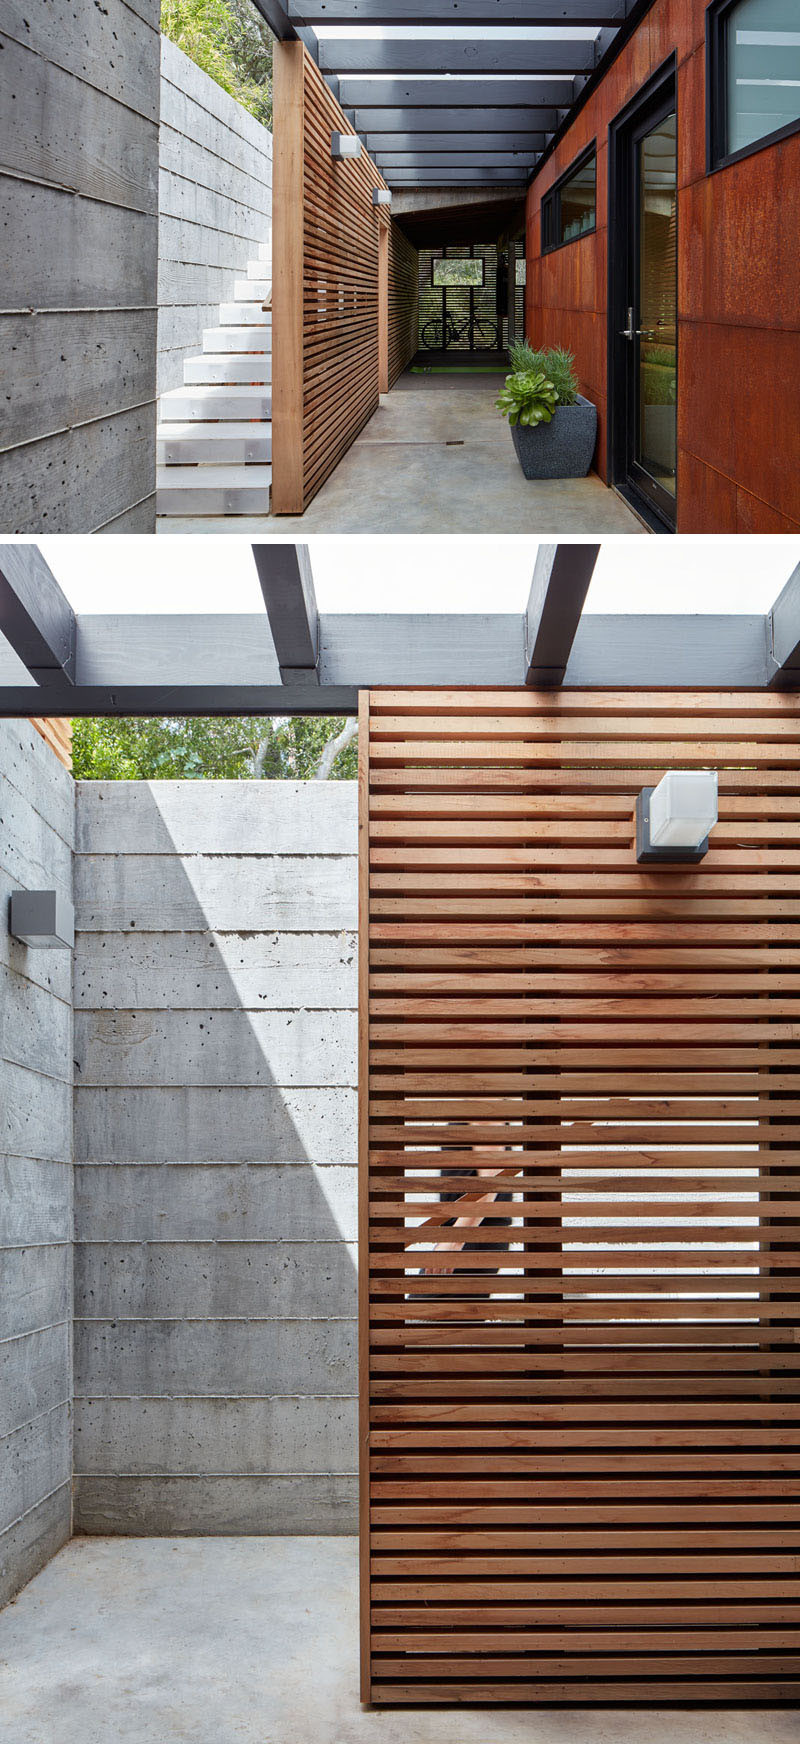 These concrete exterior stairs have a wooden privacy screen.